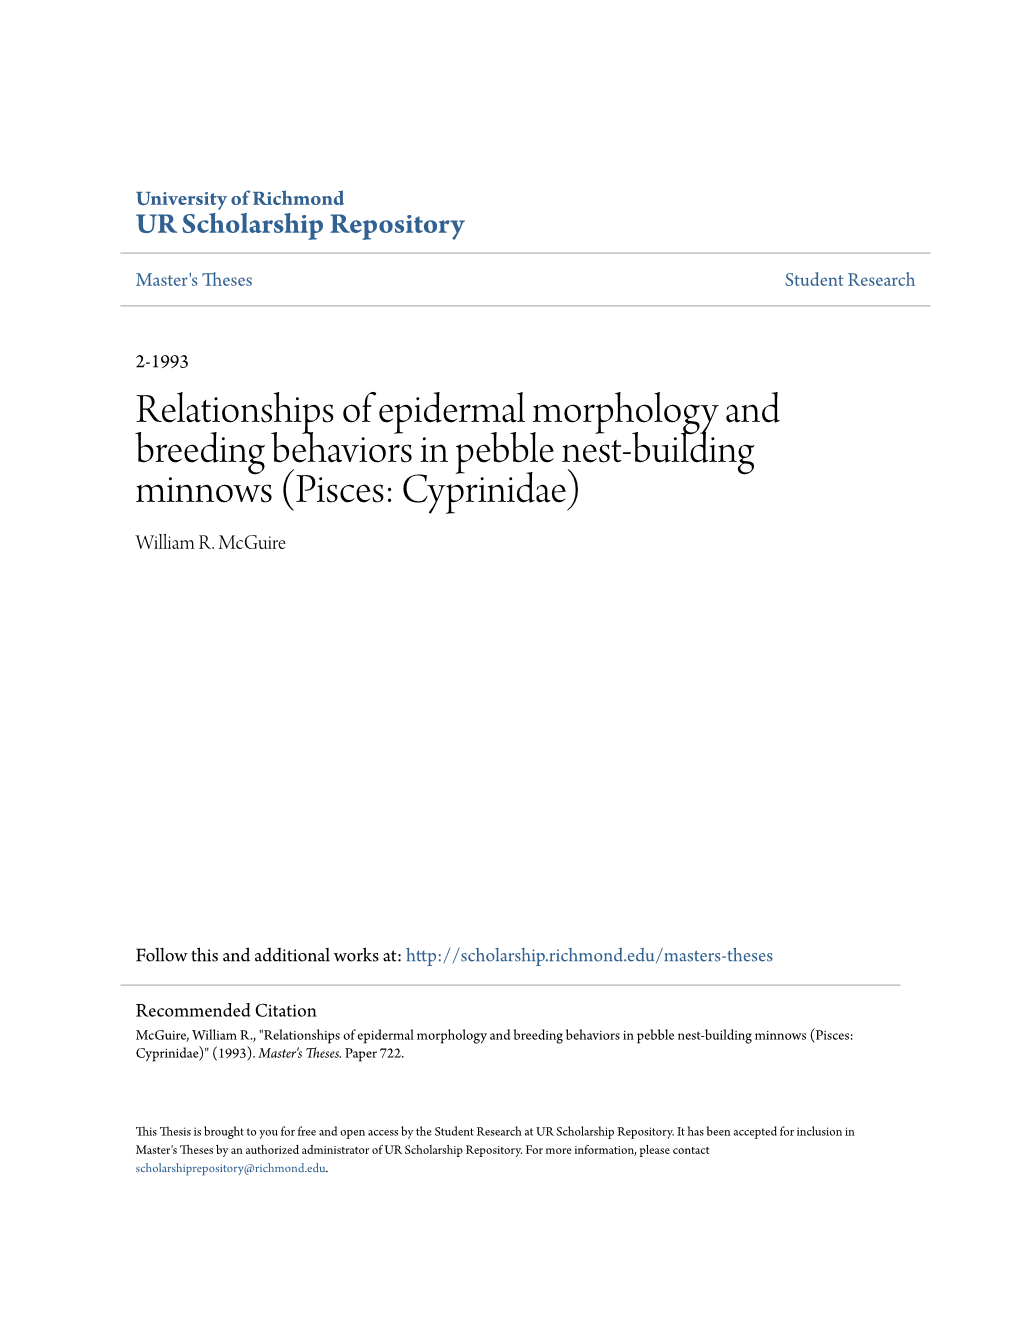 Relationships of Epidermal Morphology and Breeding Behaviors in Pebble Nest-Building Minnows (Pisces: Cyprinidae) William R